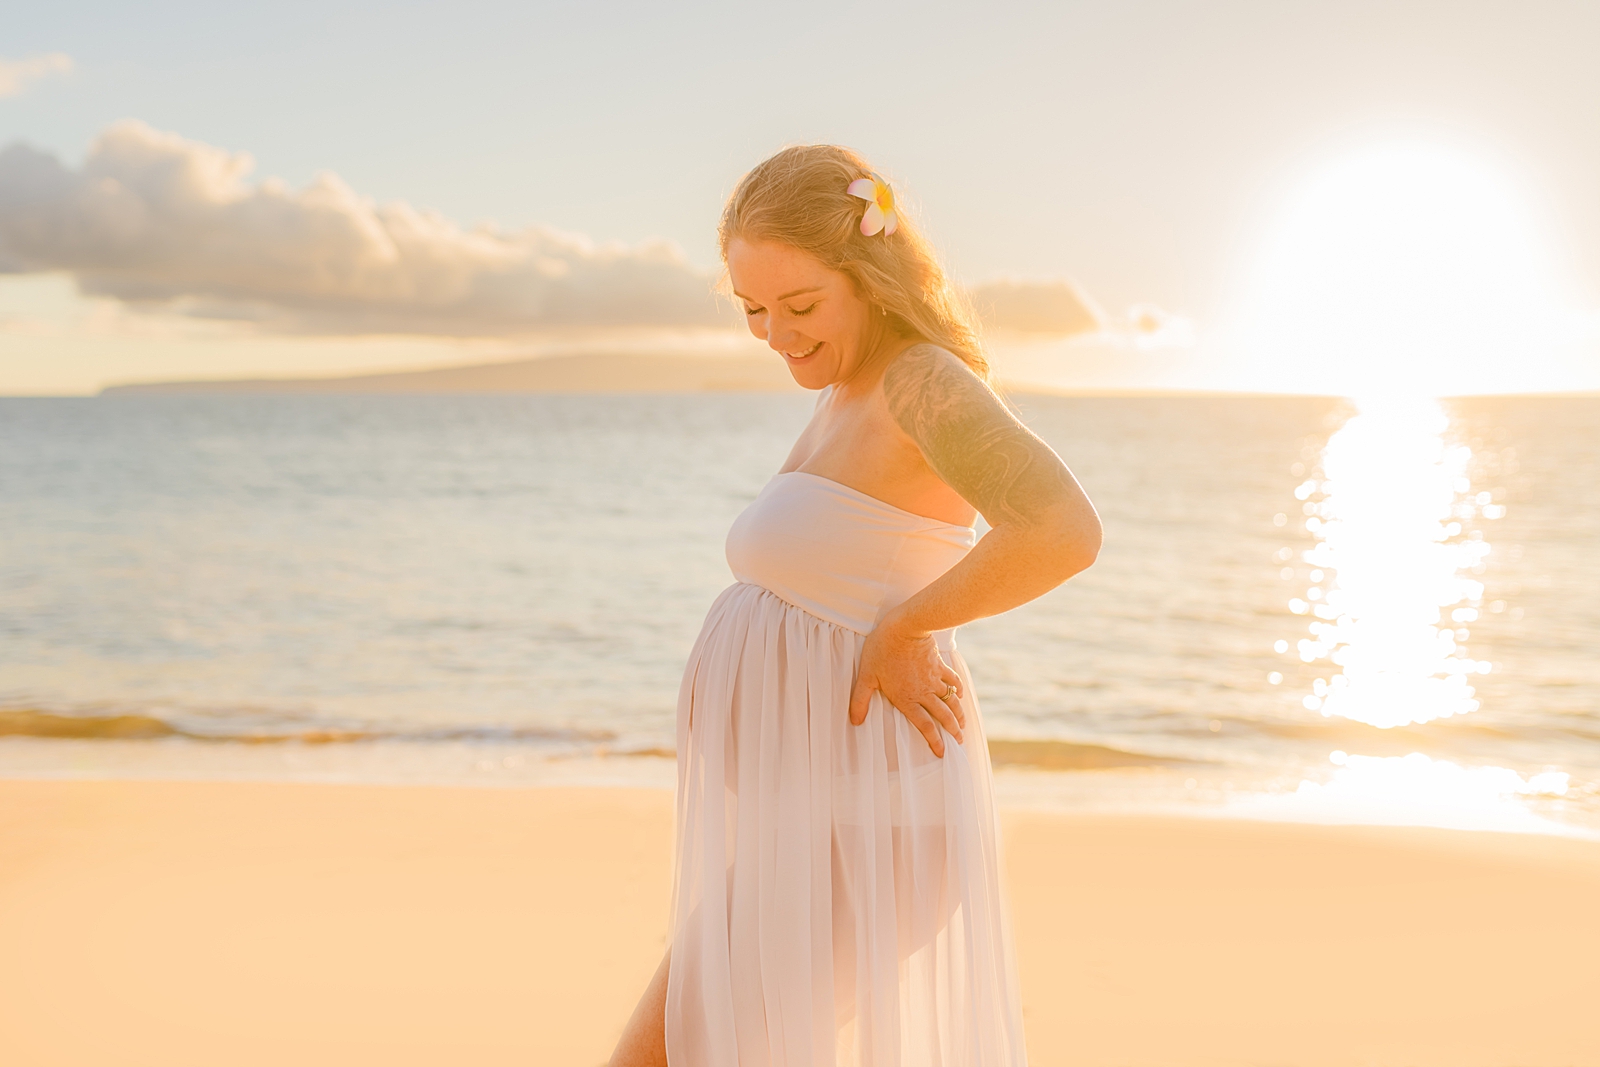 Woman in sheer white maternity gown places hands on hips and smiles down at her pregnant belly on the beach in hawaii